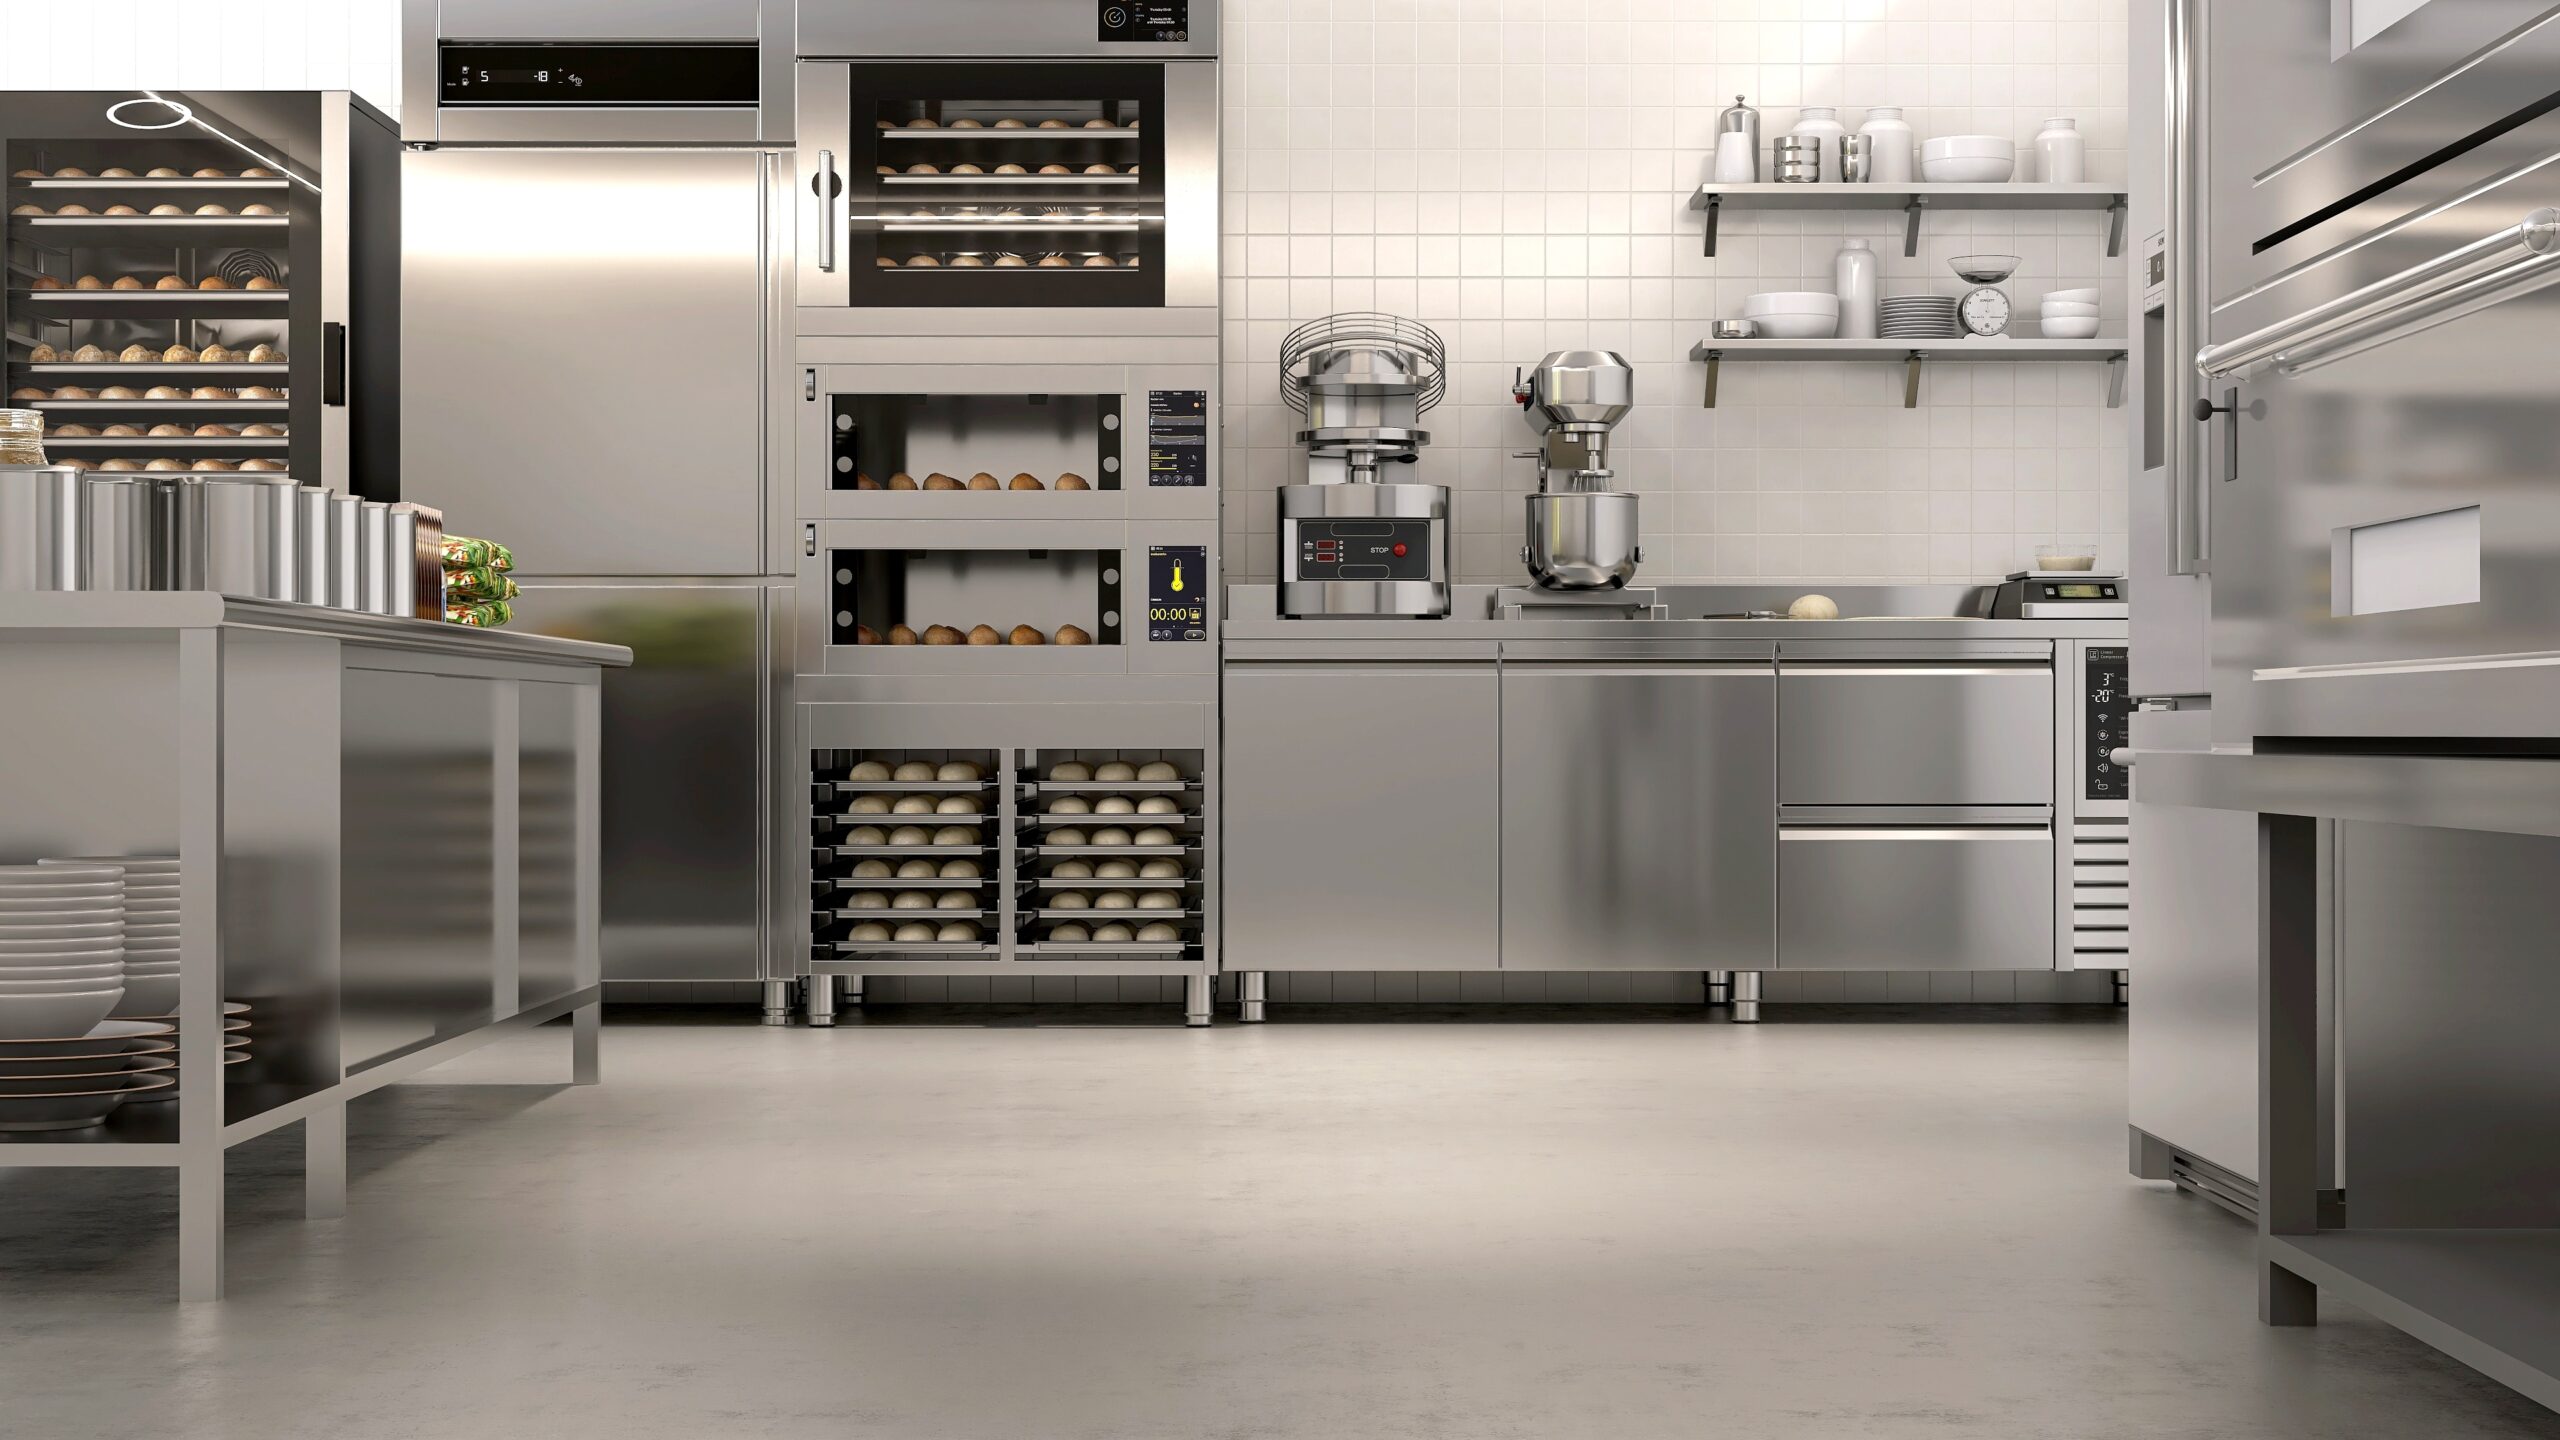 Keeping Your Commercial Kitchen Clean, Safe, and Sanitary